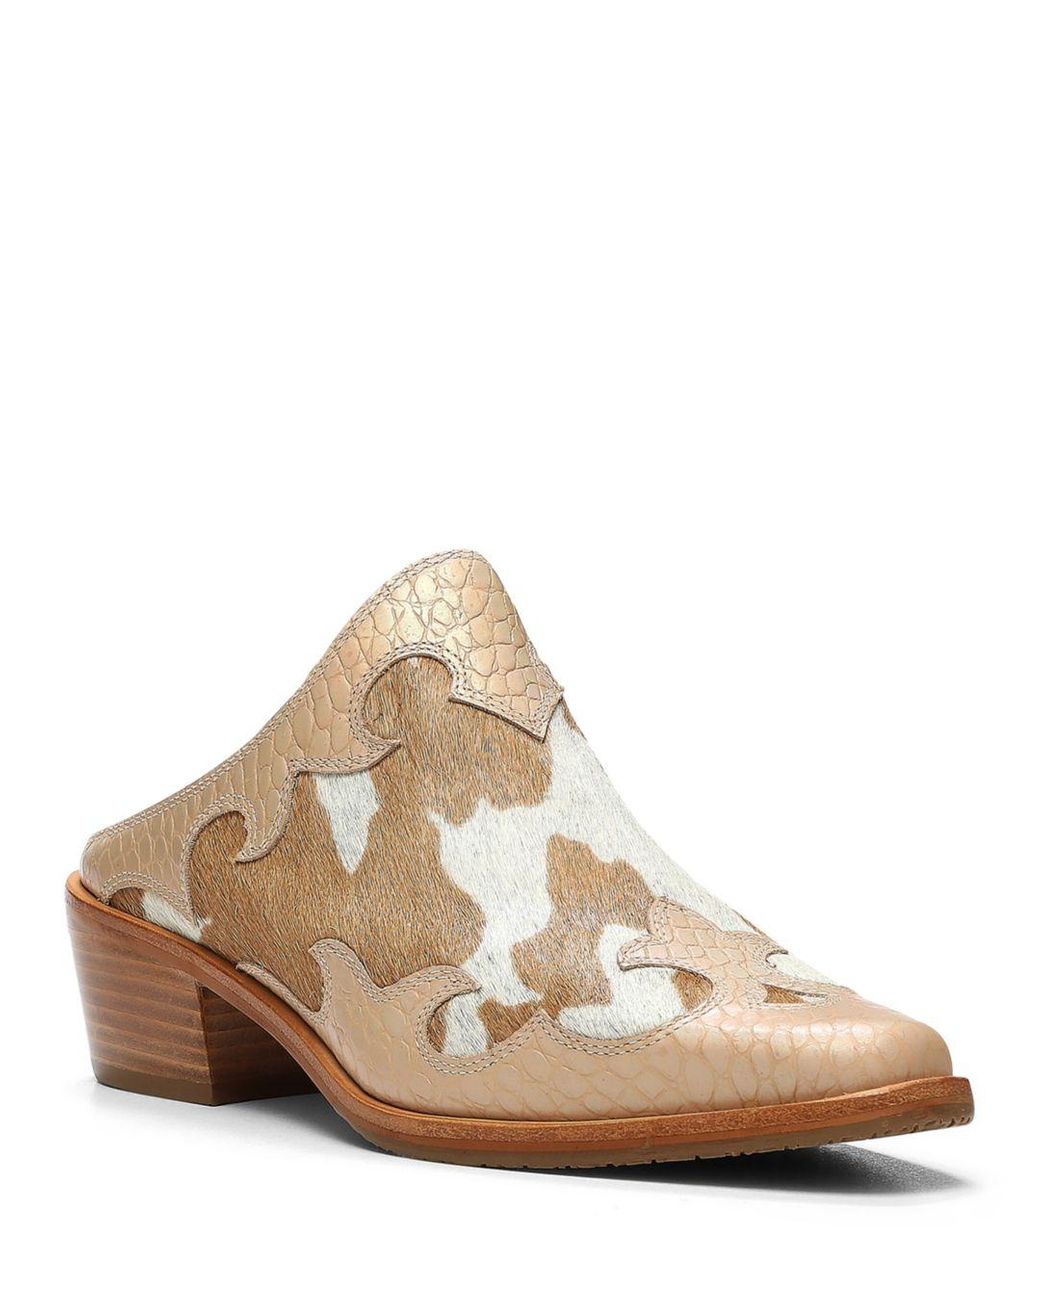 Donald J Pliner Mindy Pointed Toe Slip On Mules in Natural | Lyst